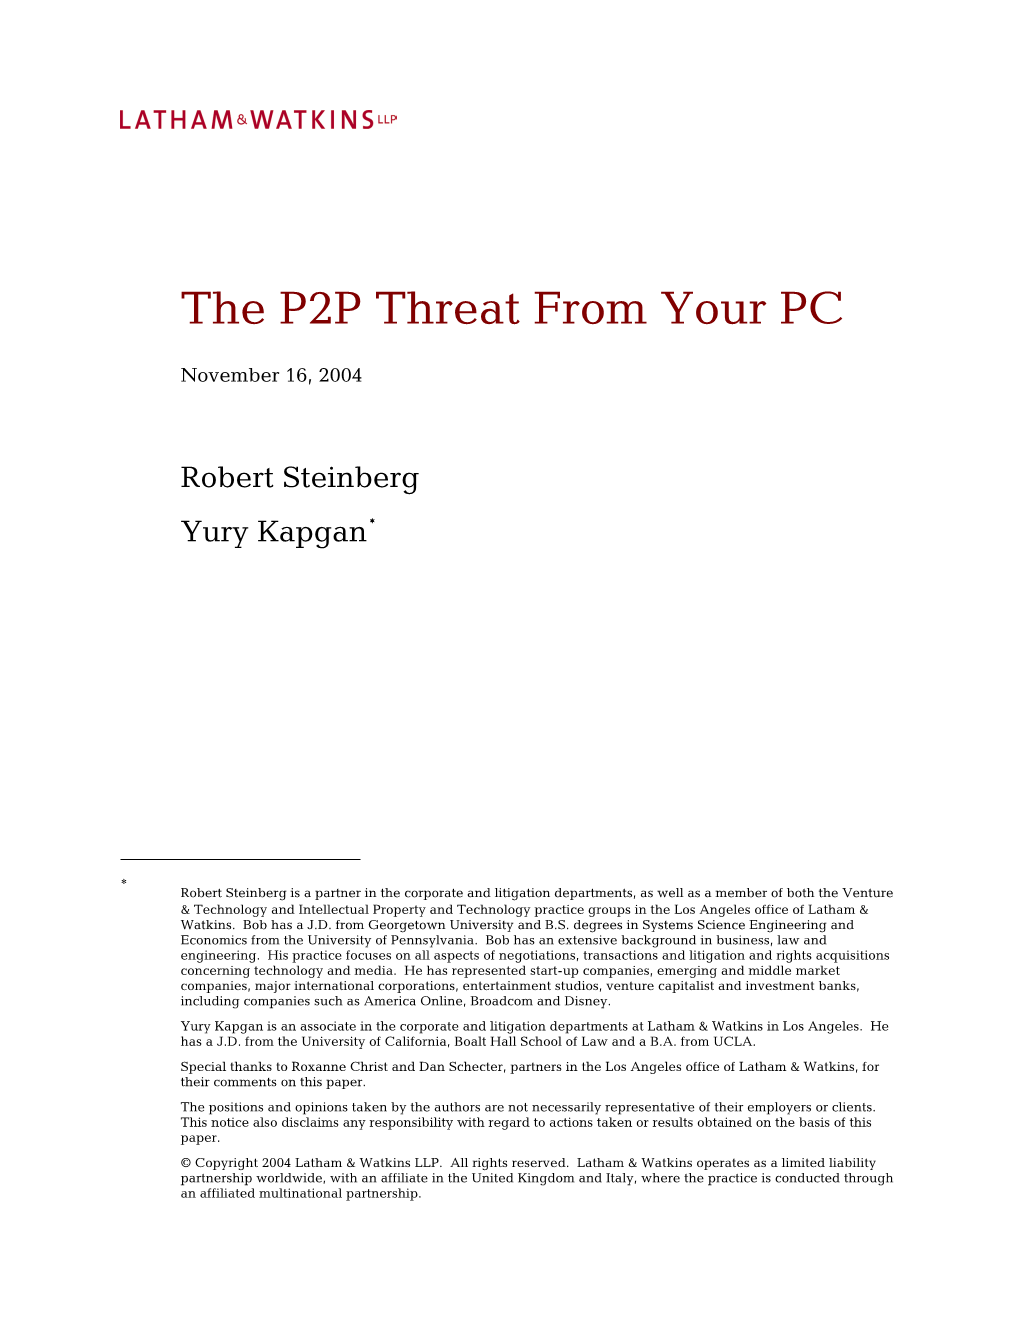 The P2P Threat from Your PC